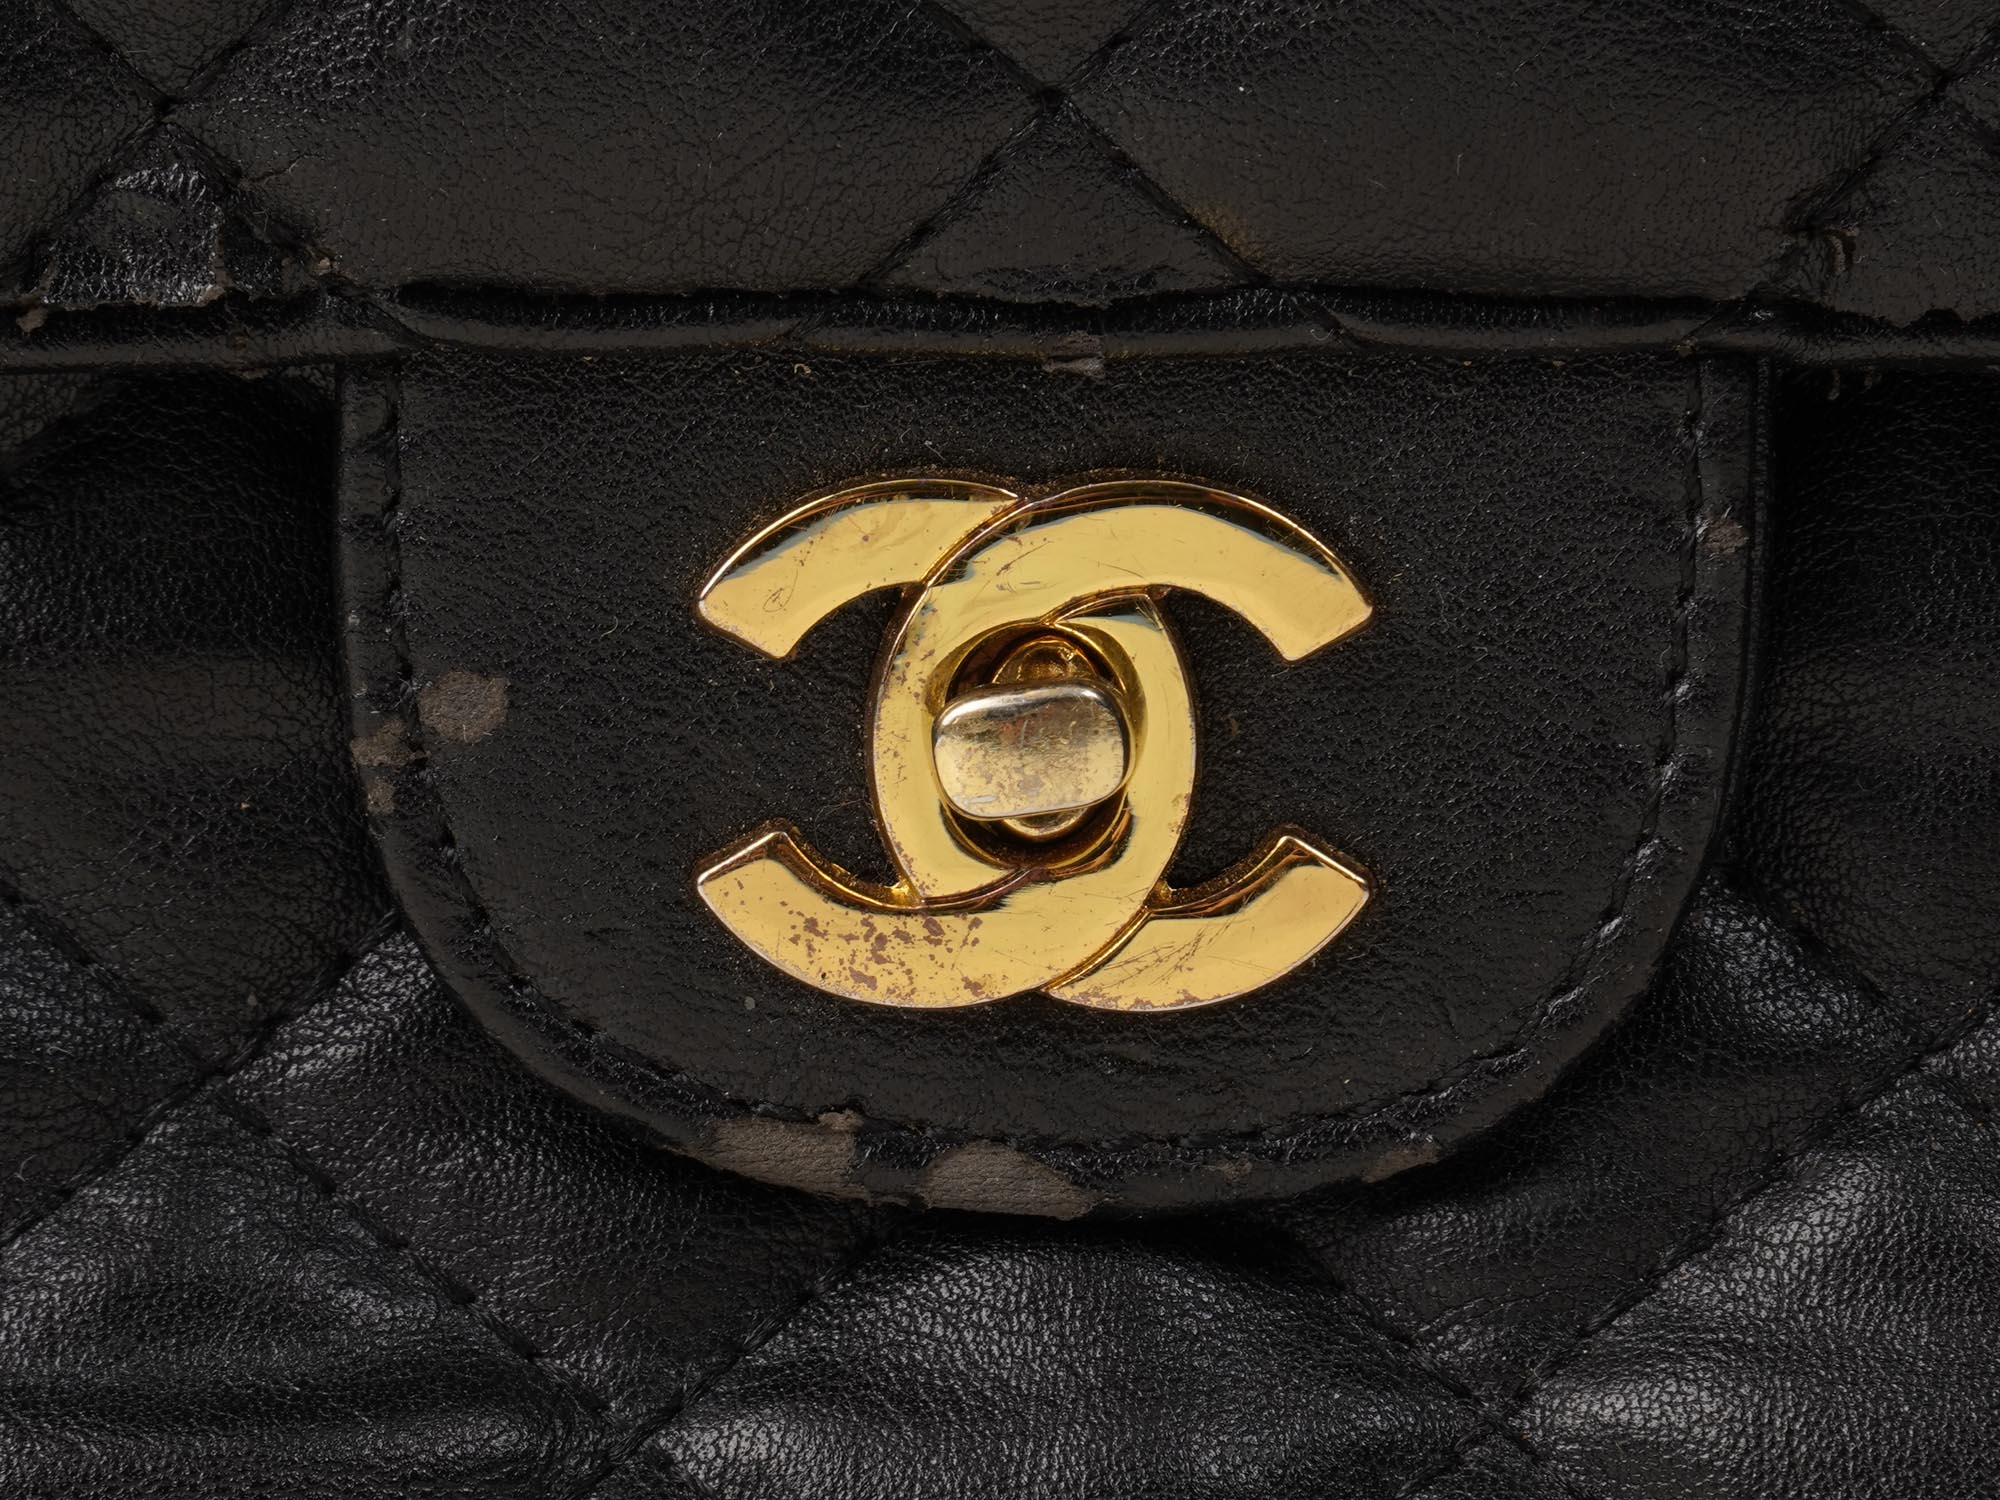 CHANEL STYLE FLAP QUILTED BLACK LEATHER BAG PURSE PIC-6